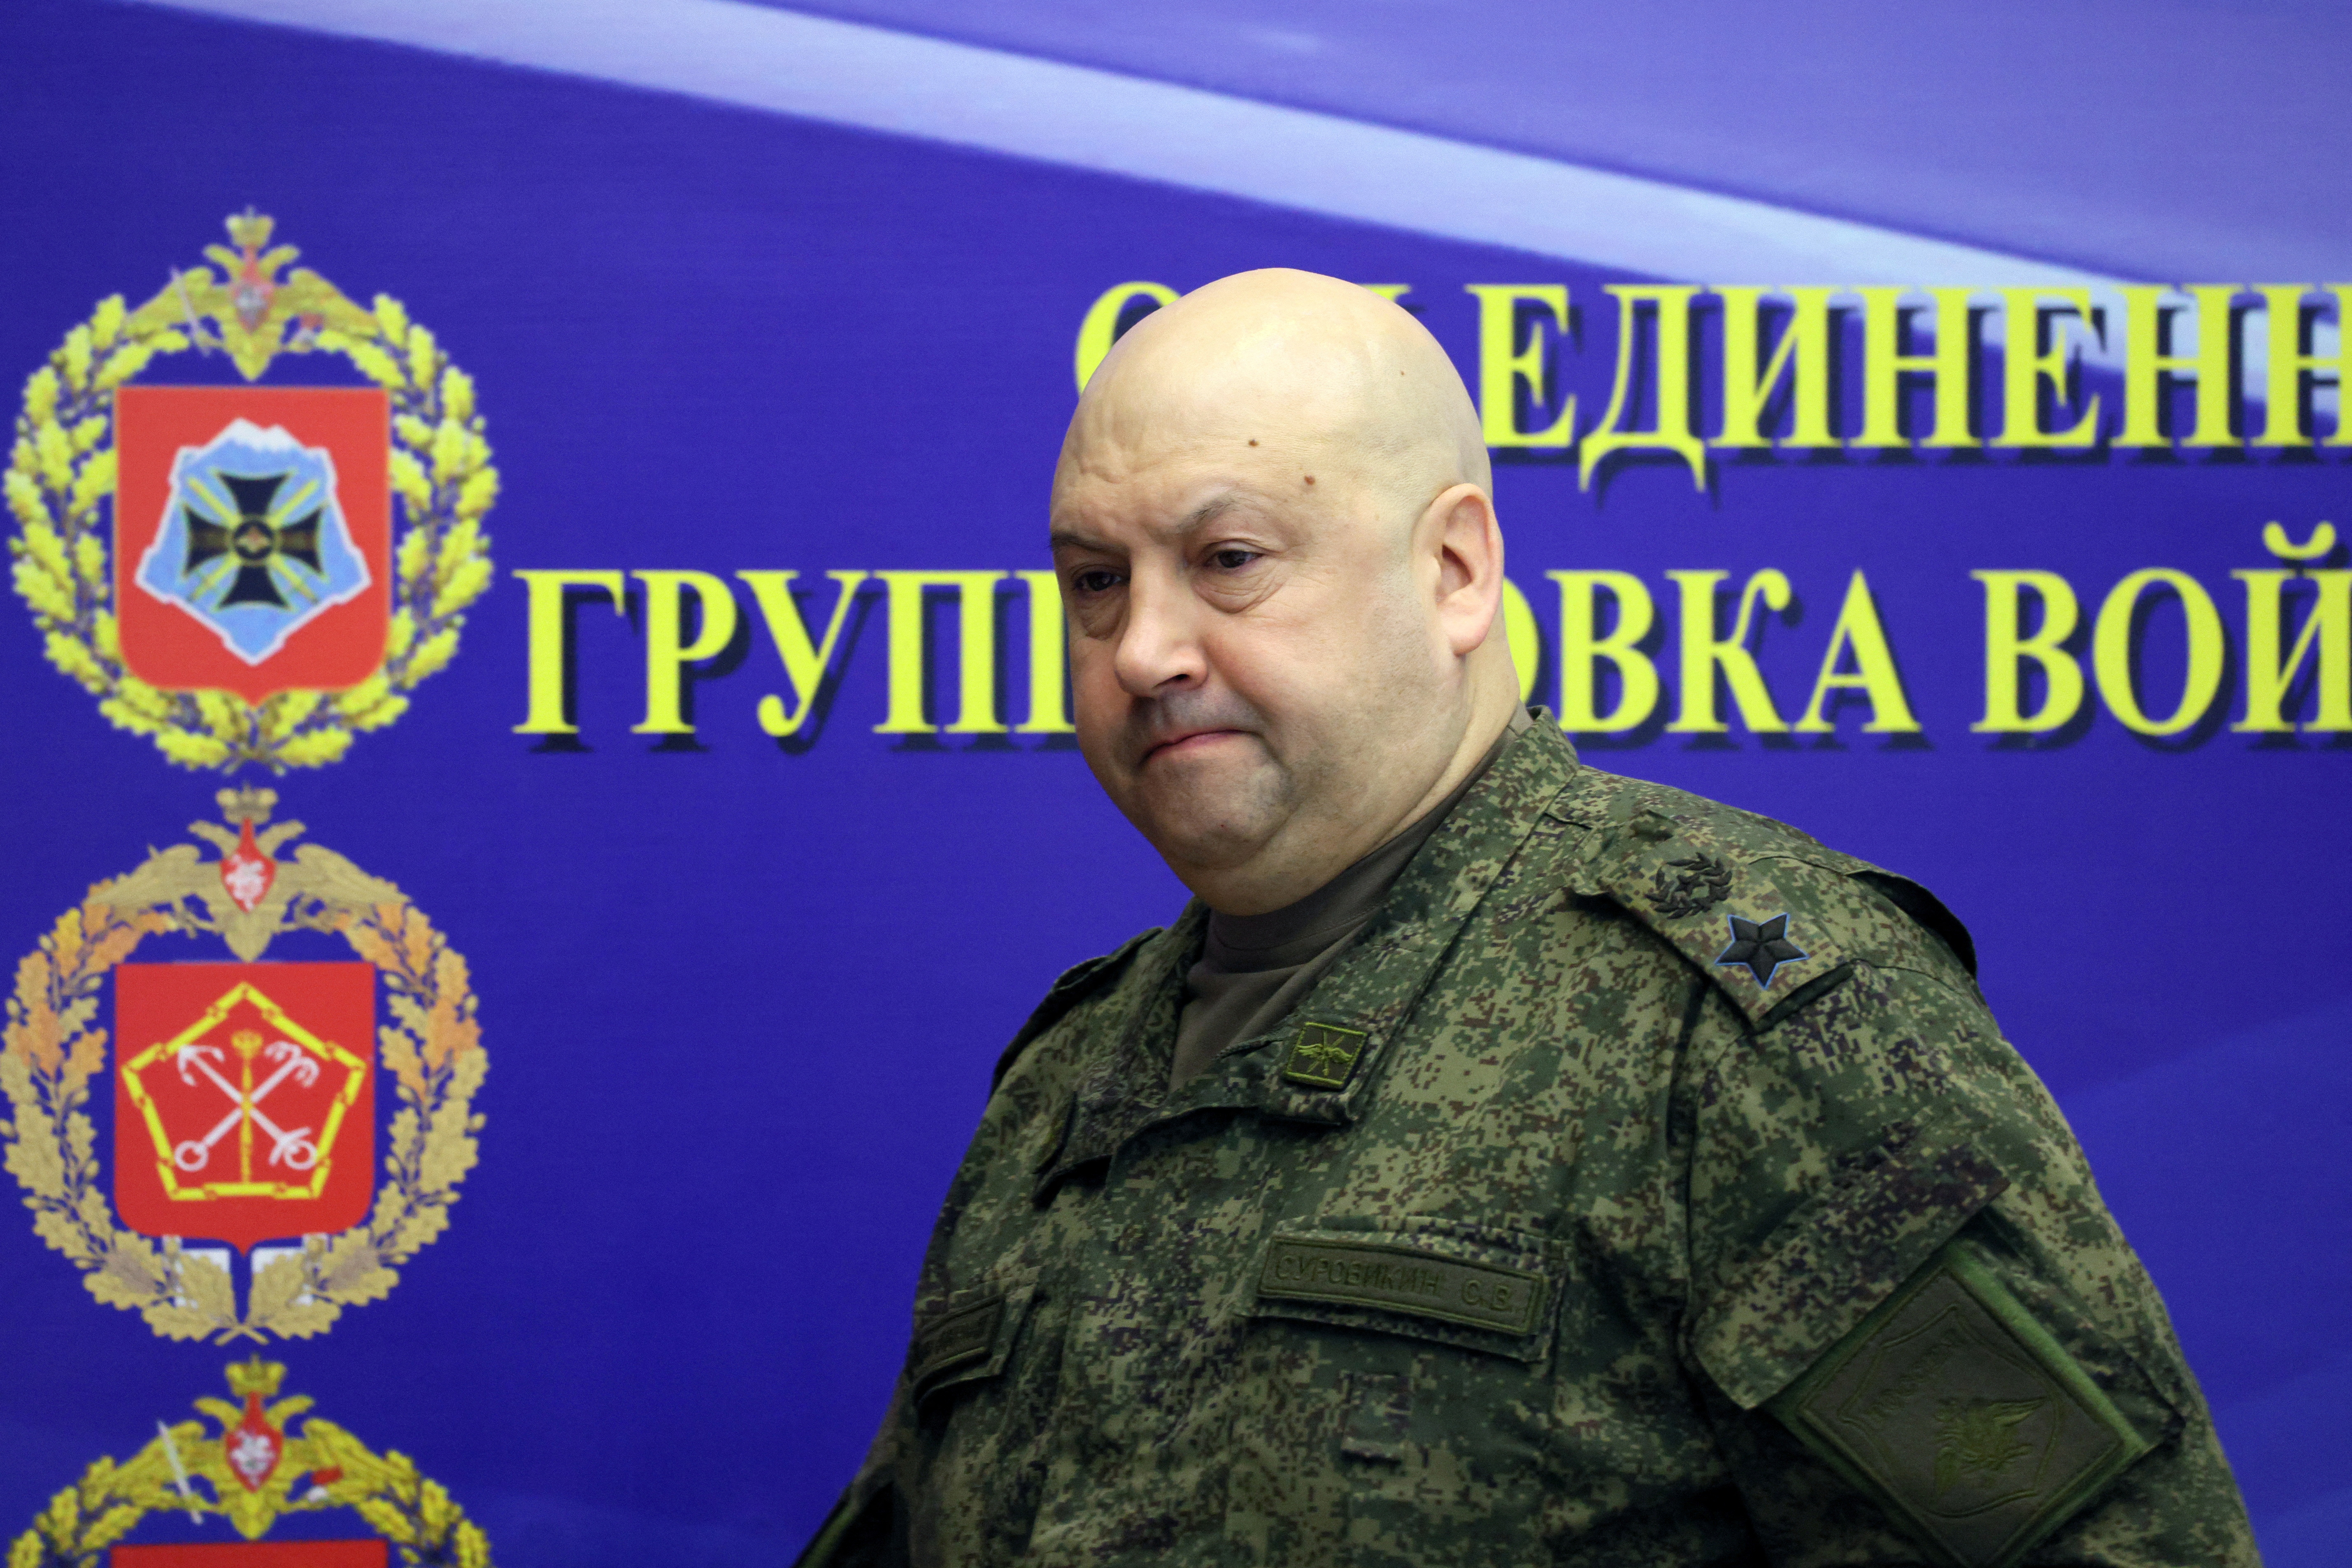 General Sergei Surovikin visits the Joint Headquarters of the Russian armed forces, in an unknown location